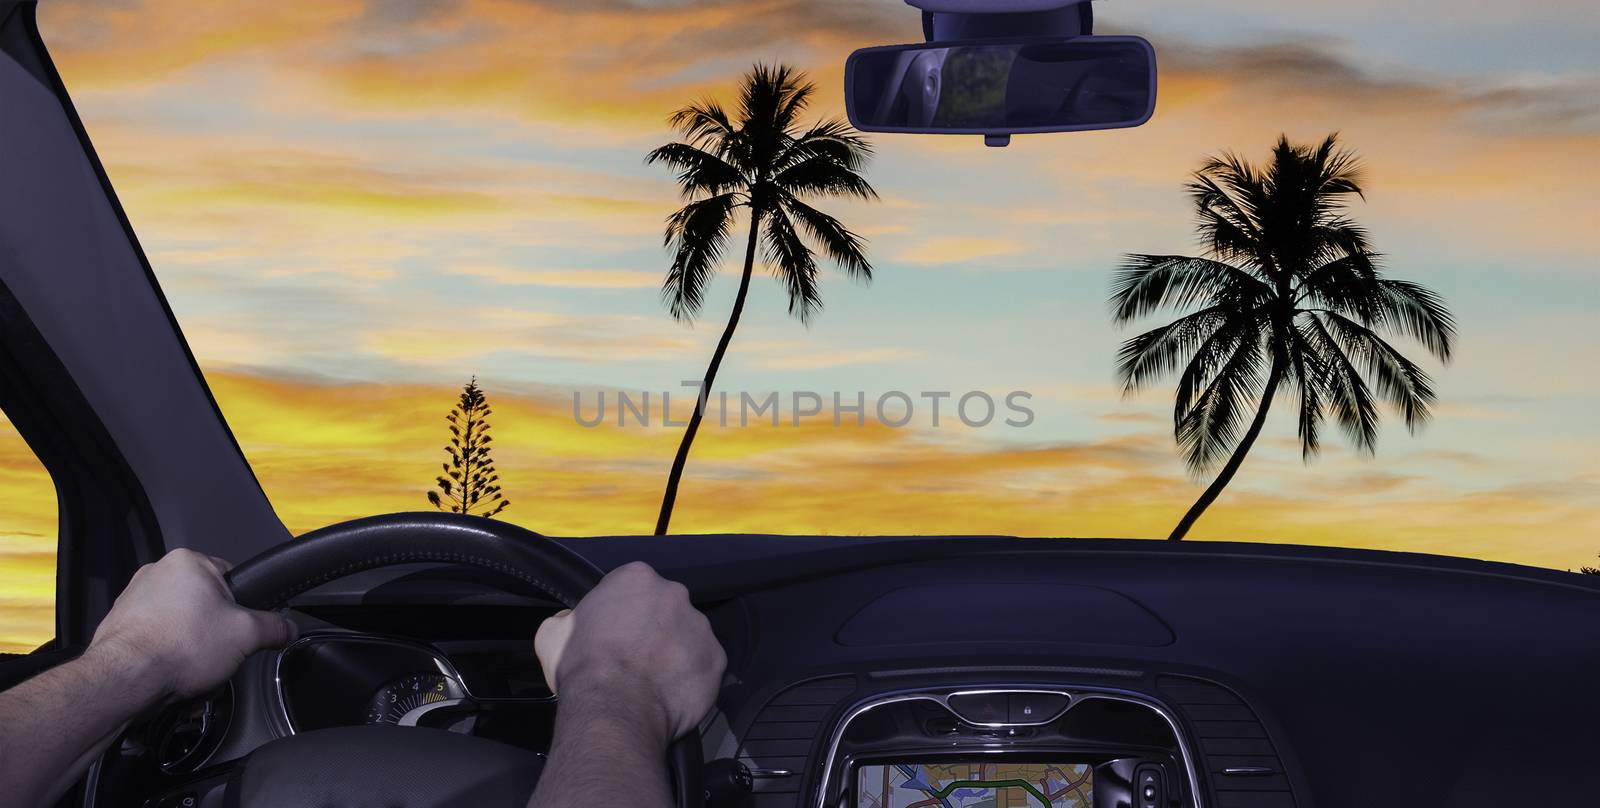 Driving a car towards a tropical sunset in Moorea, French Polynesia